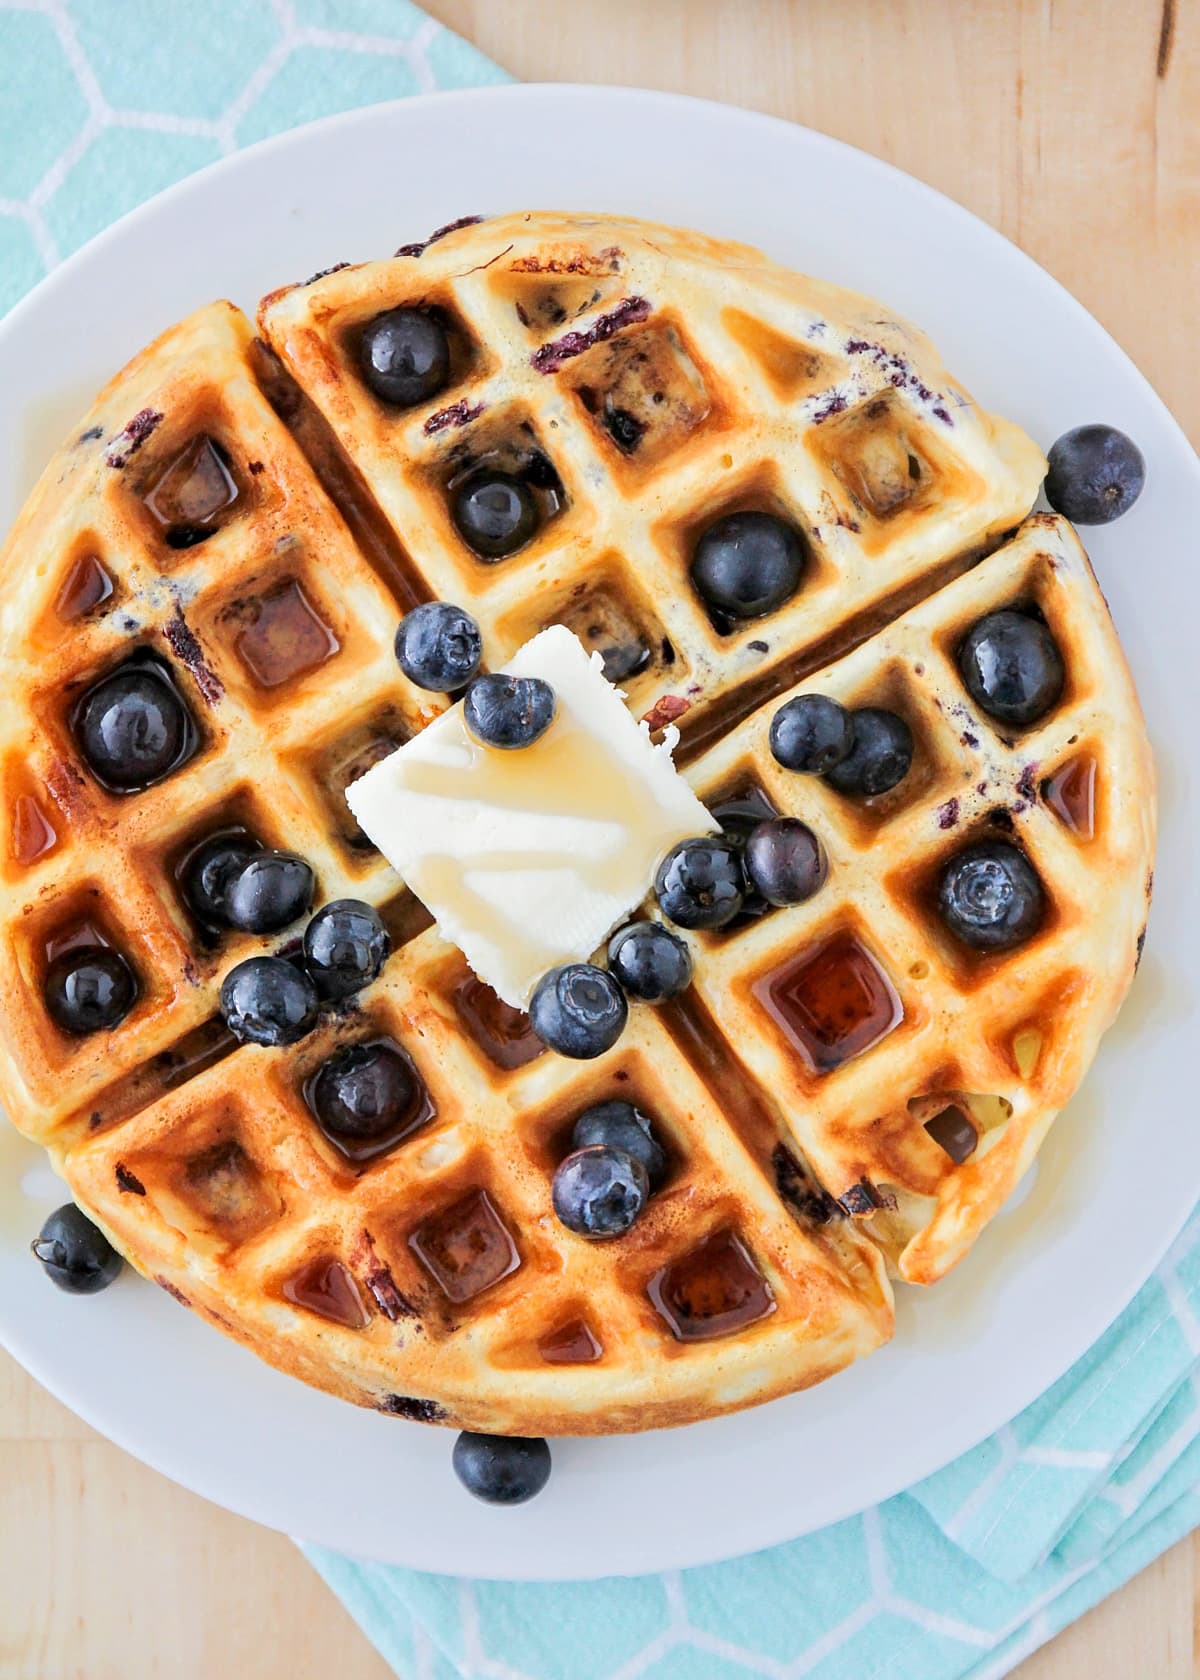 Top view of a stack of blueberry waffles topped with syrup, butter, and fresh berries.